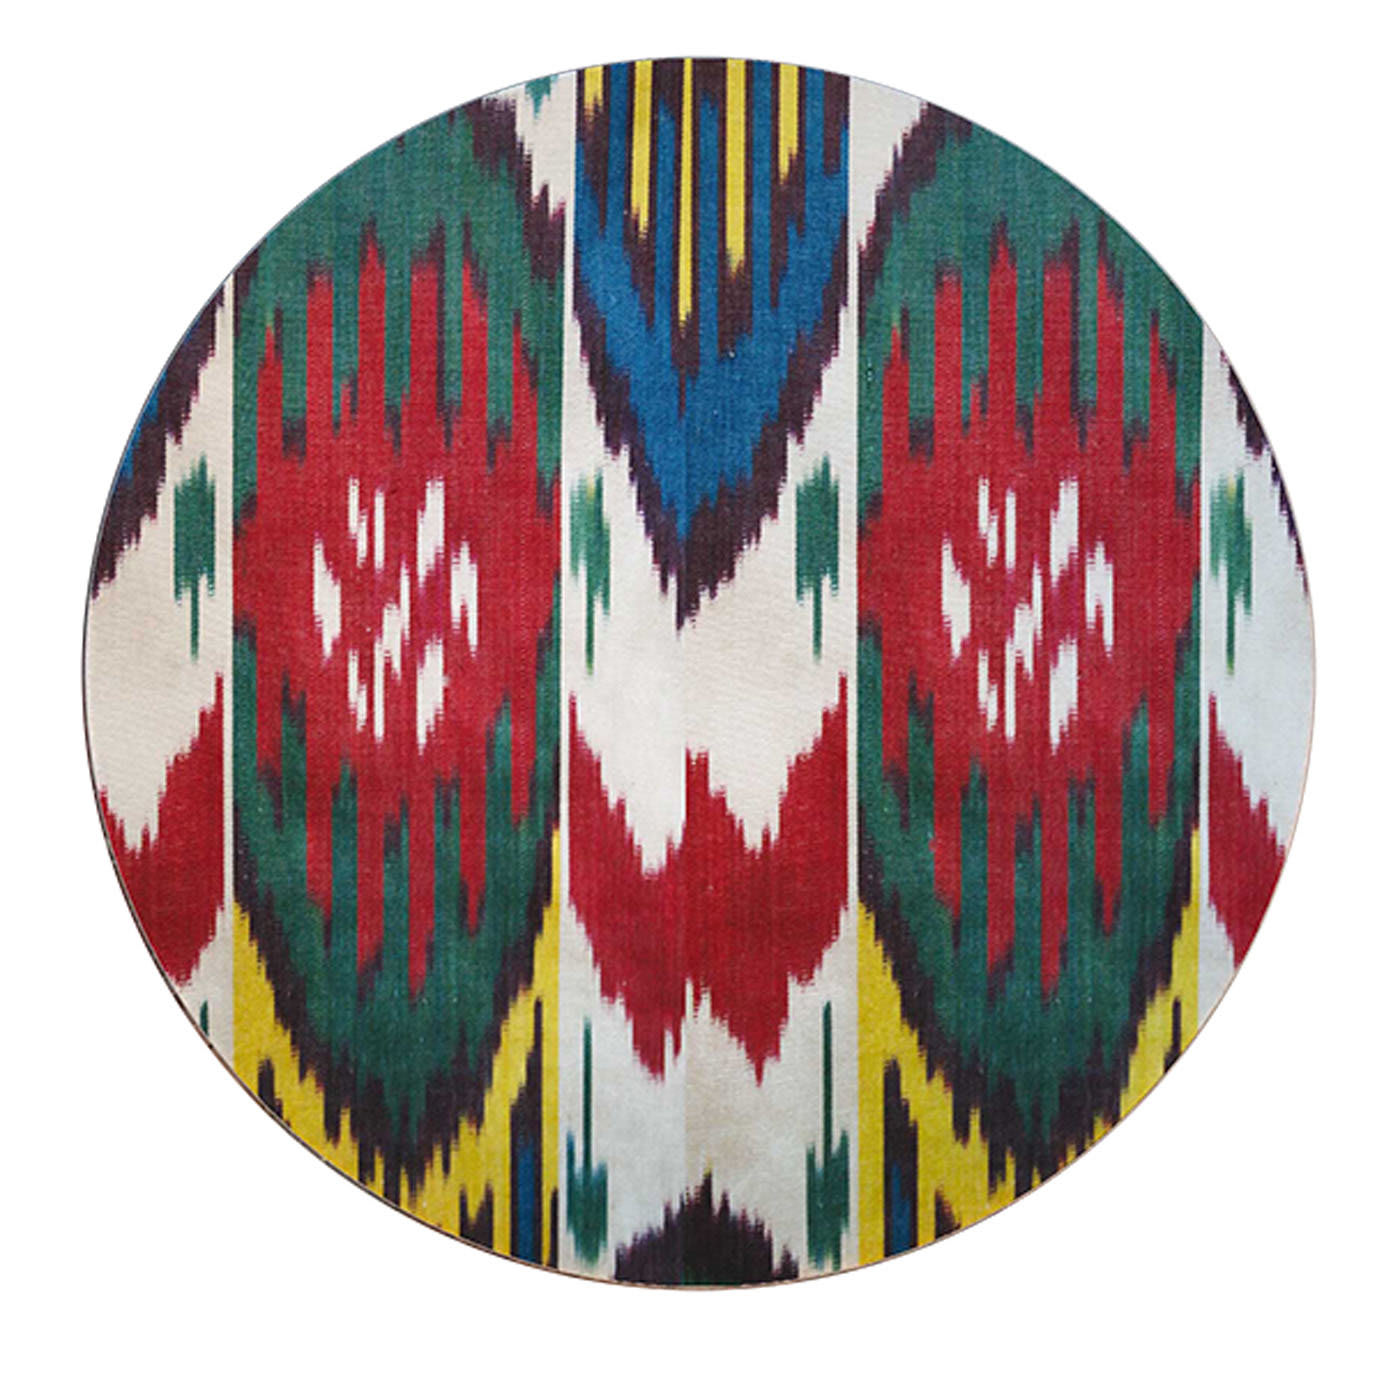 Set of 6 Ikat Porcelain Plates in Red and Blue - Les Ottomans